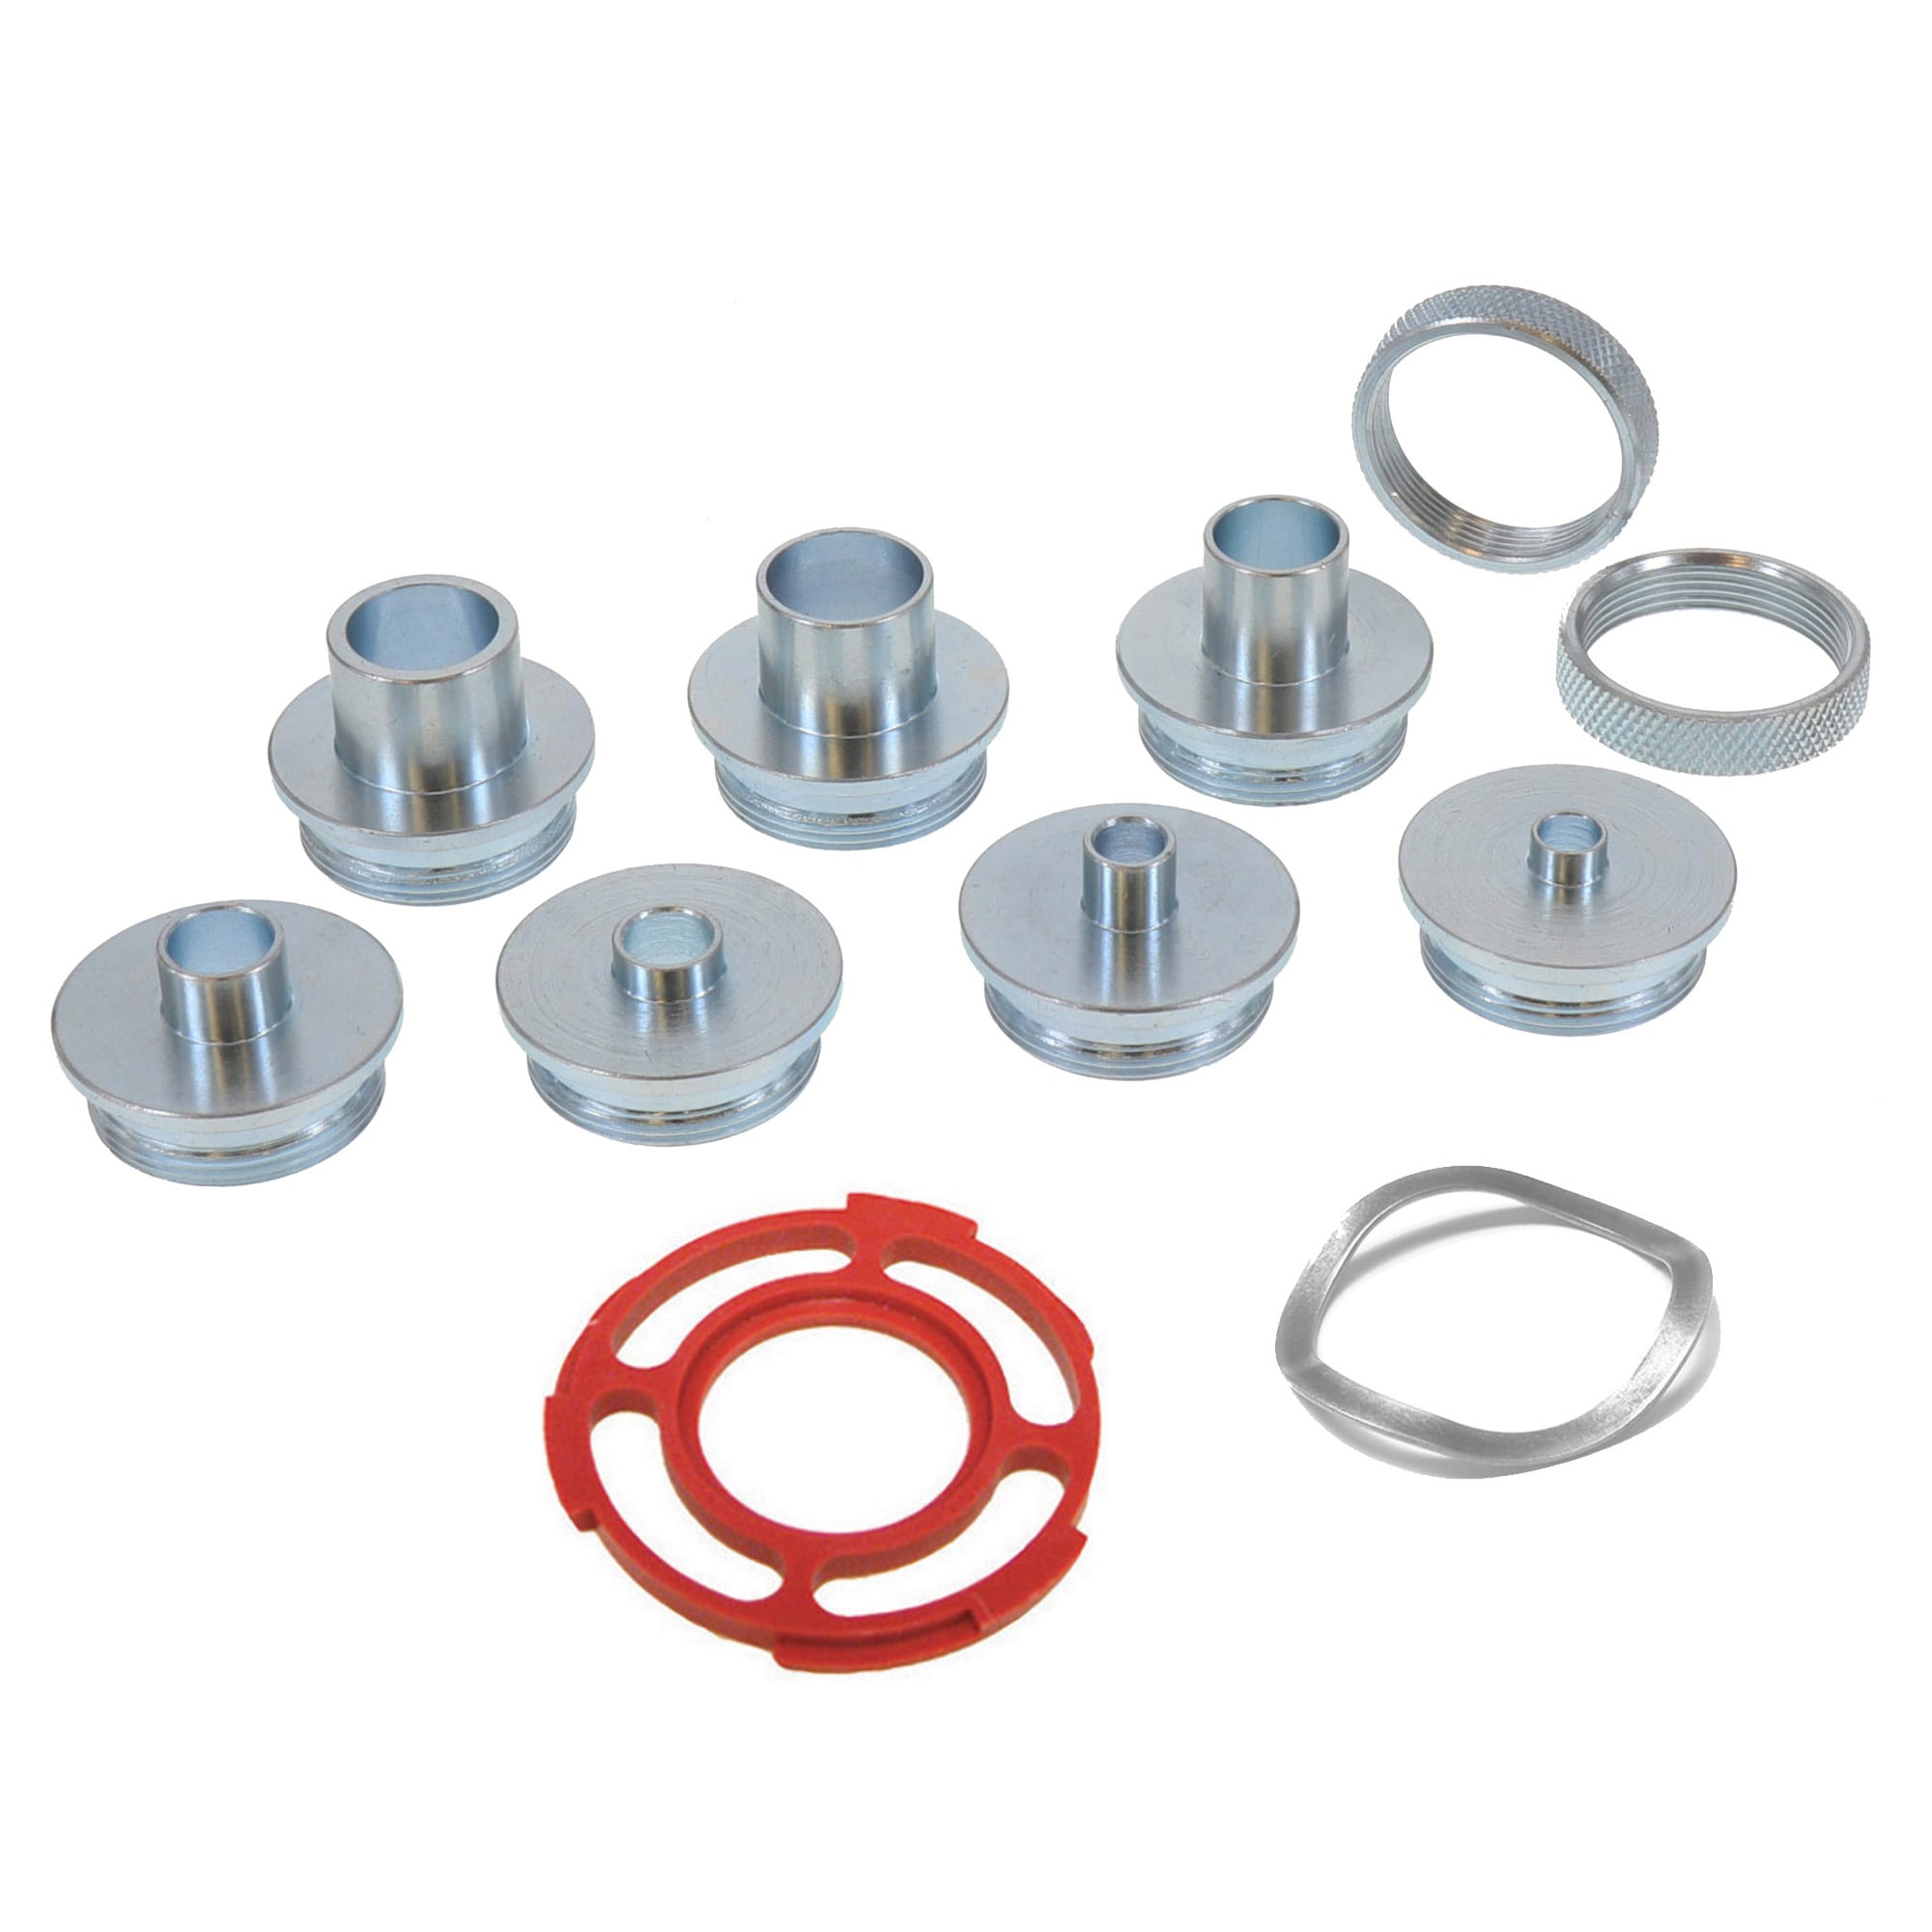 10 Pcs Router Template Guide Set Router Template Bushing Guide Router Table  Insert Plate Guide Bushing Set Router Jig Template